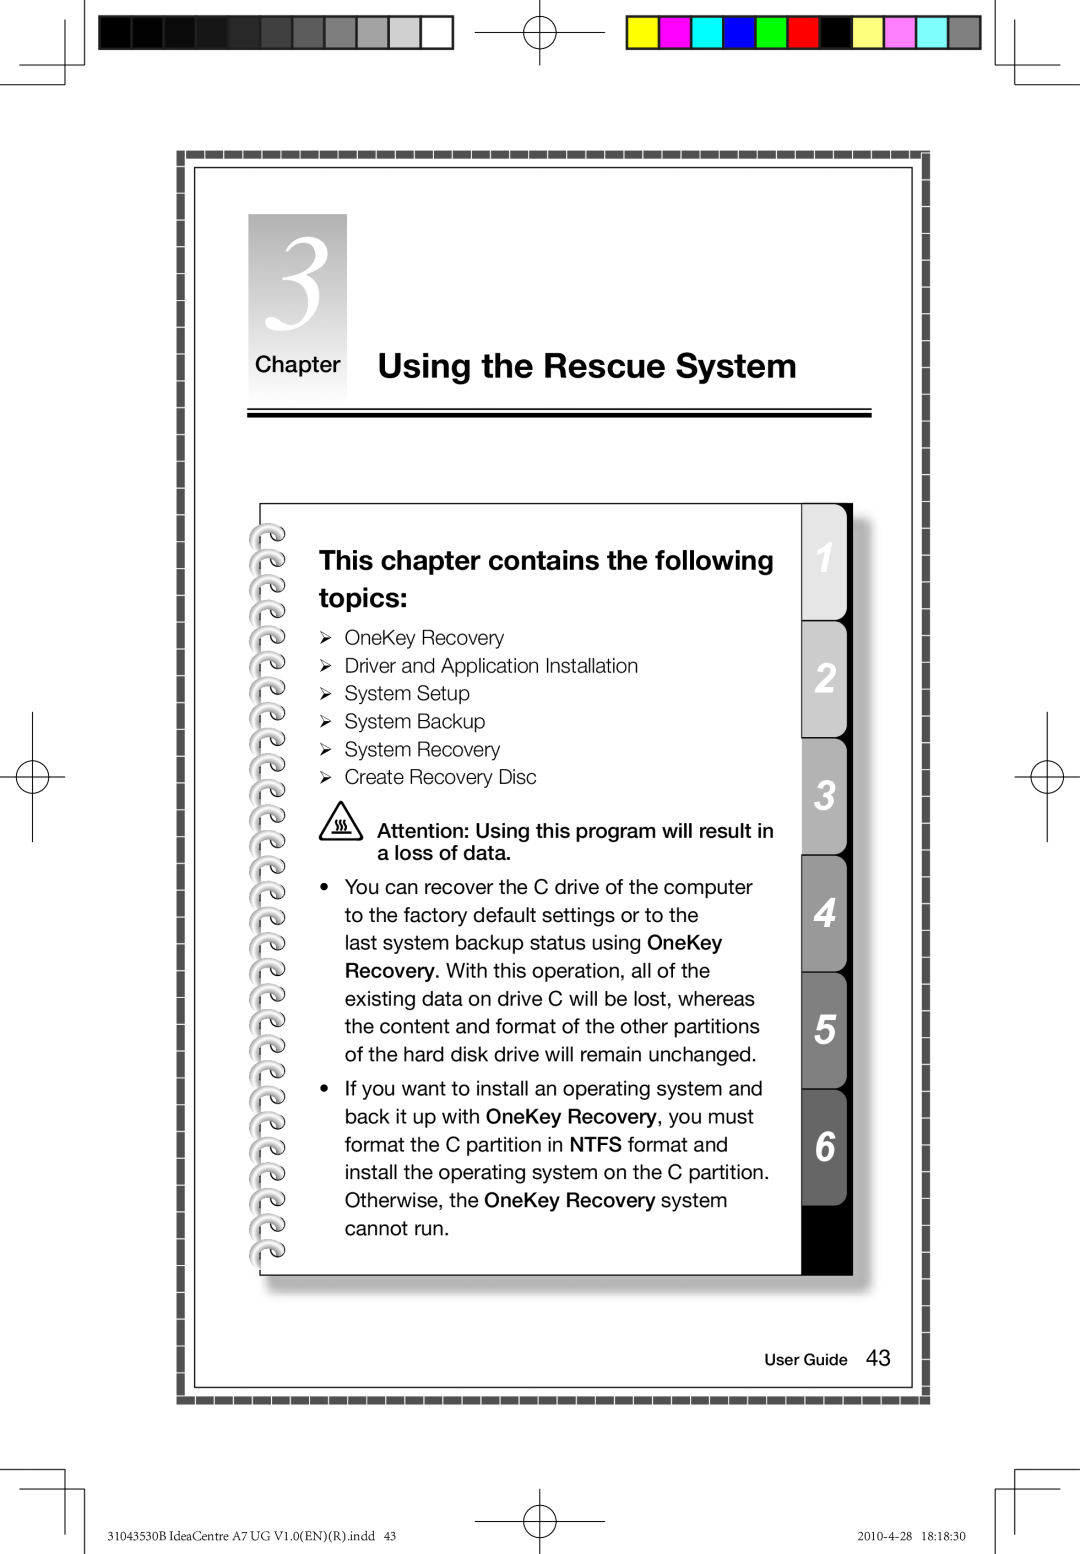 Lenovo A7 manual Chapter Using the Rescue System, This chapter contains the following topics 